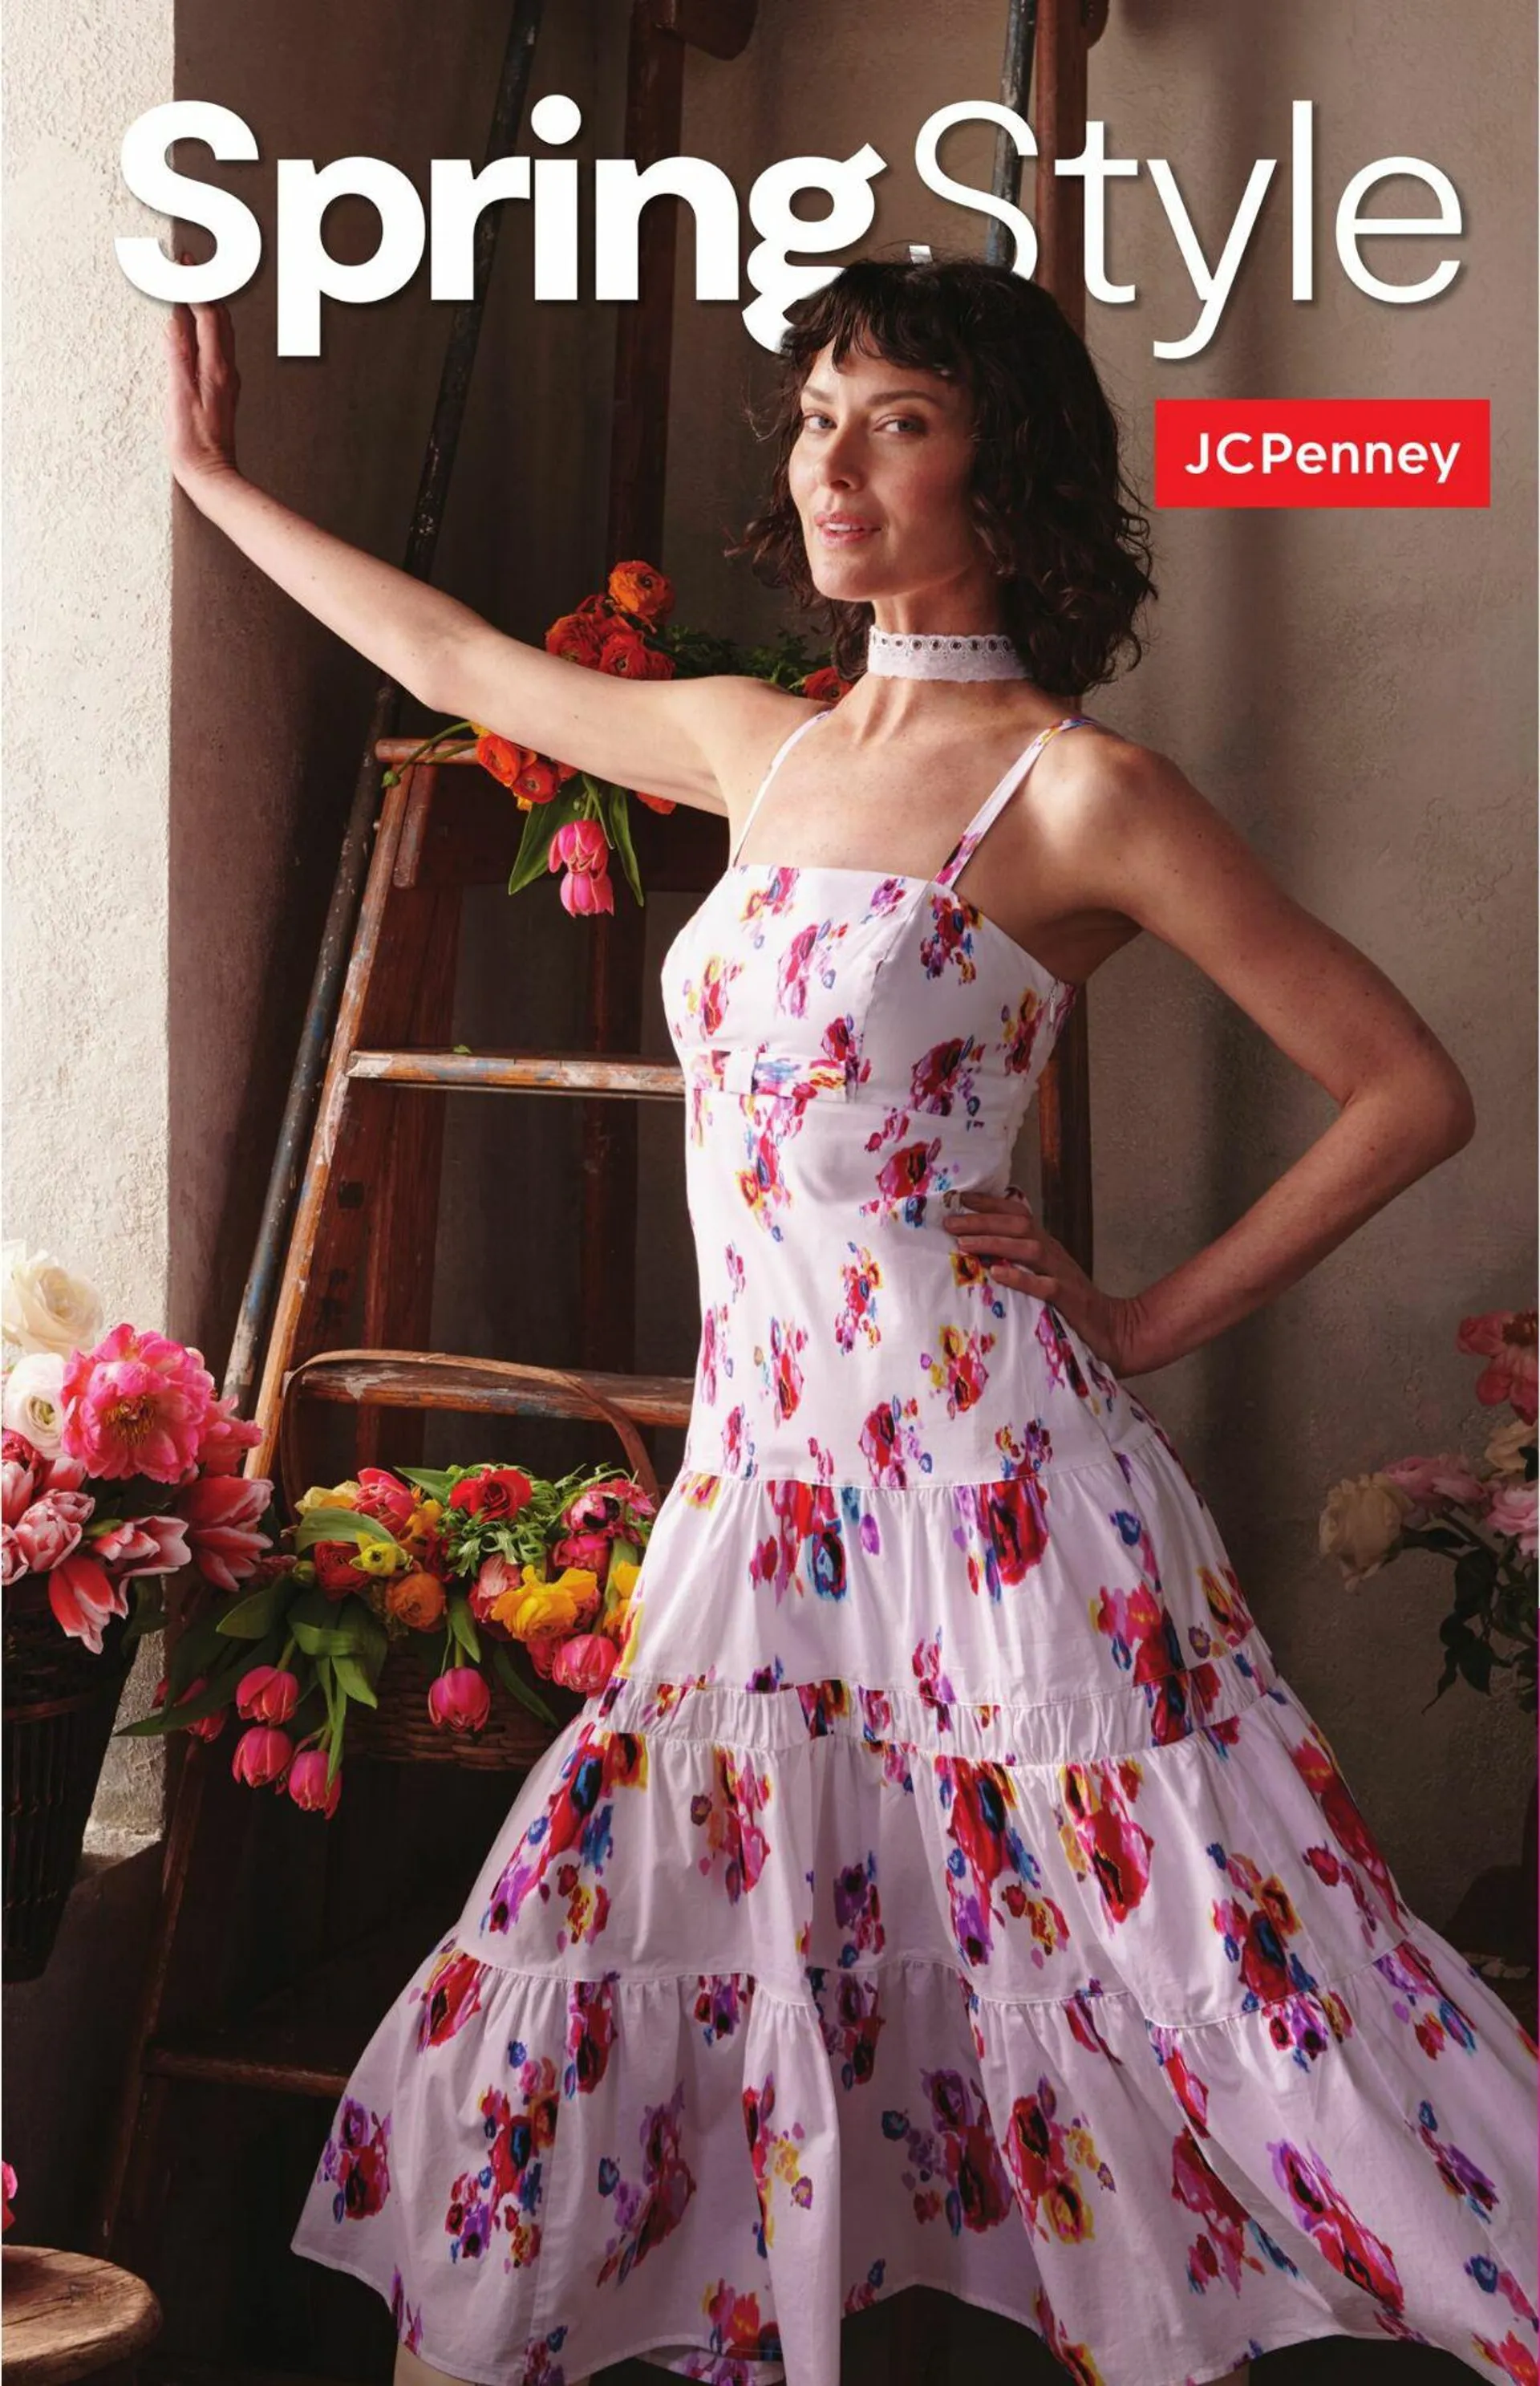 JCPenney Current weekly ad - 1